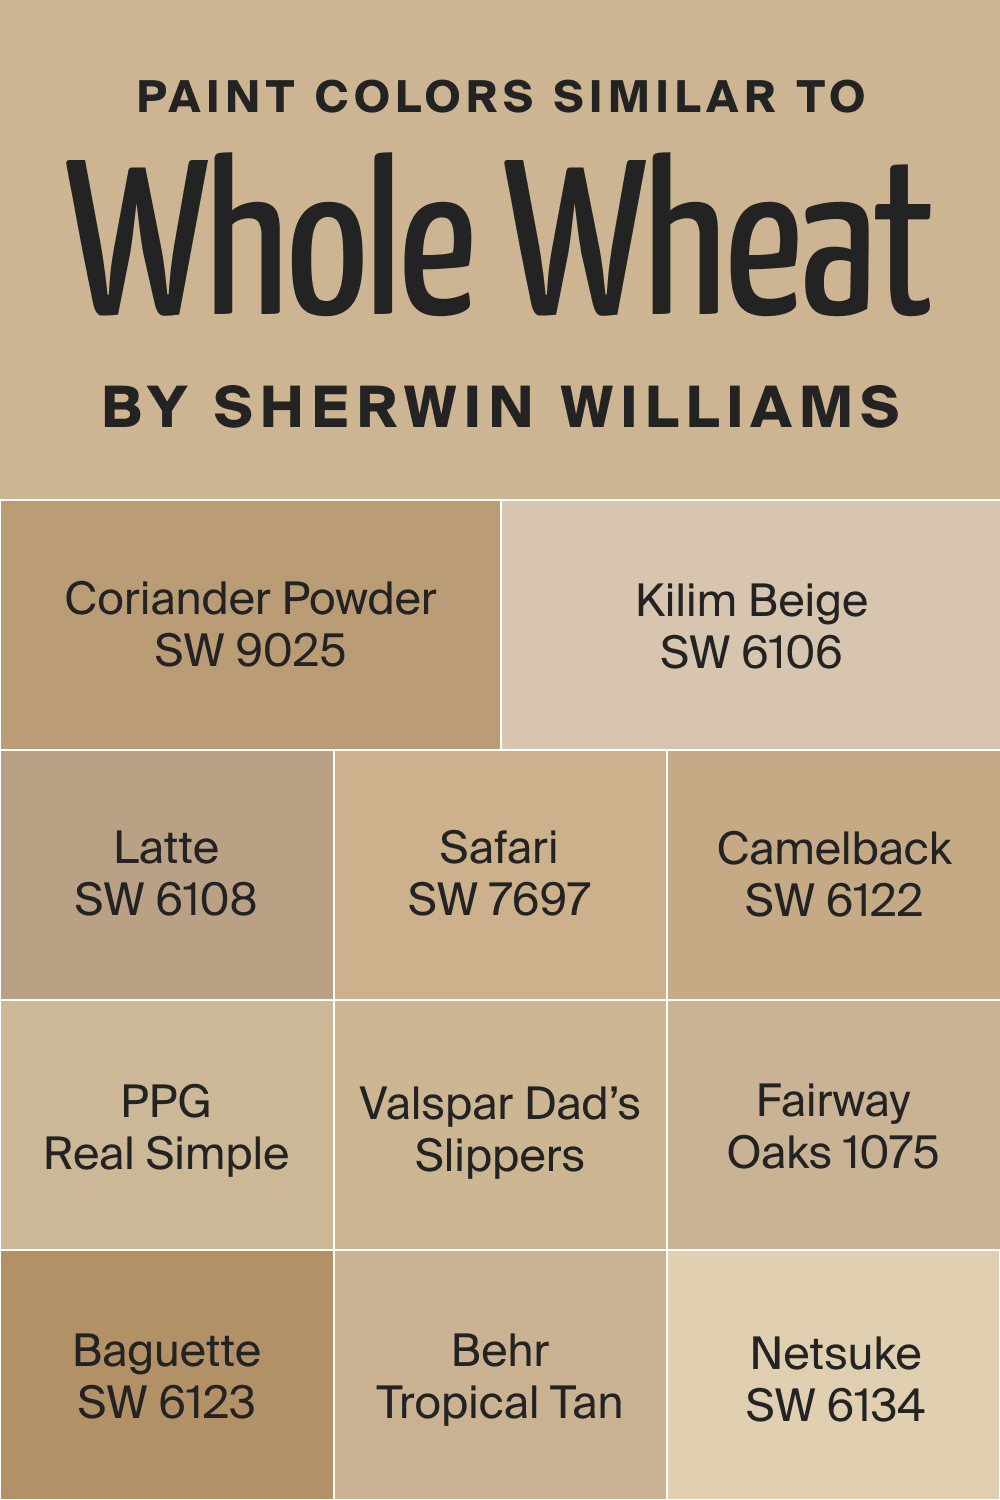 Paint Colors Similar to SW Whole Wheat by Sherwin Williams